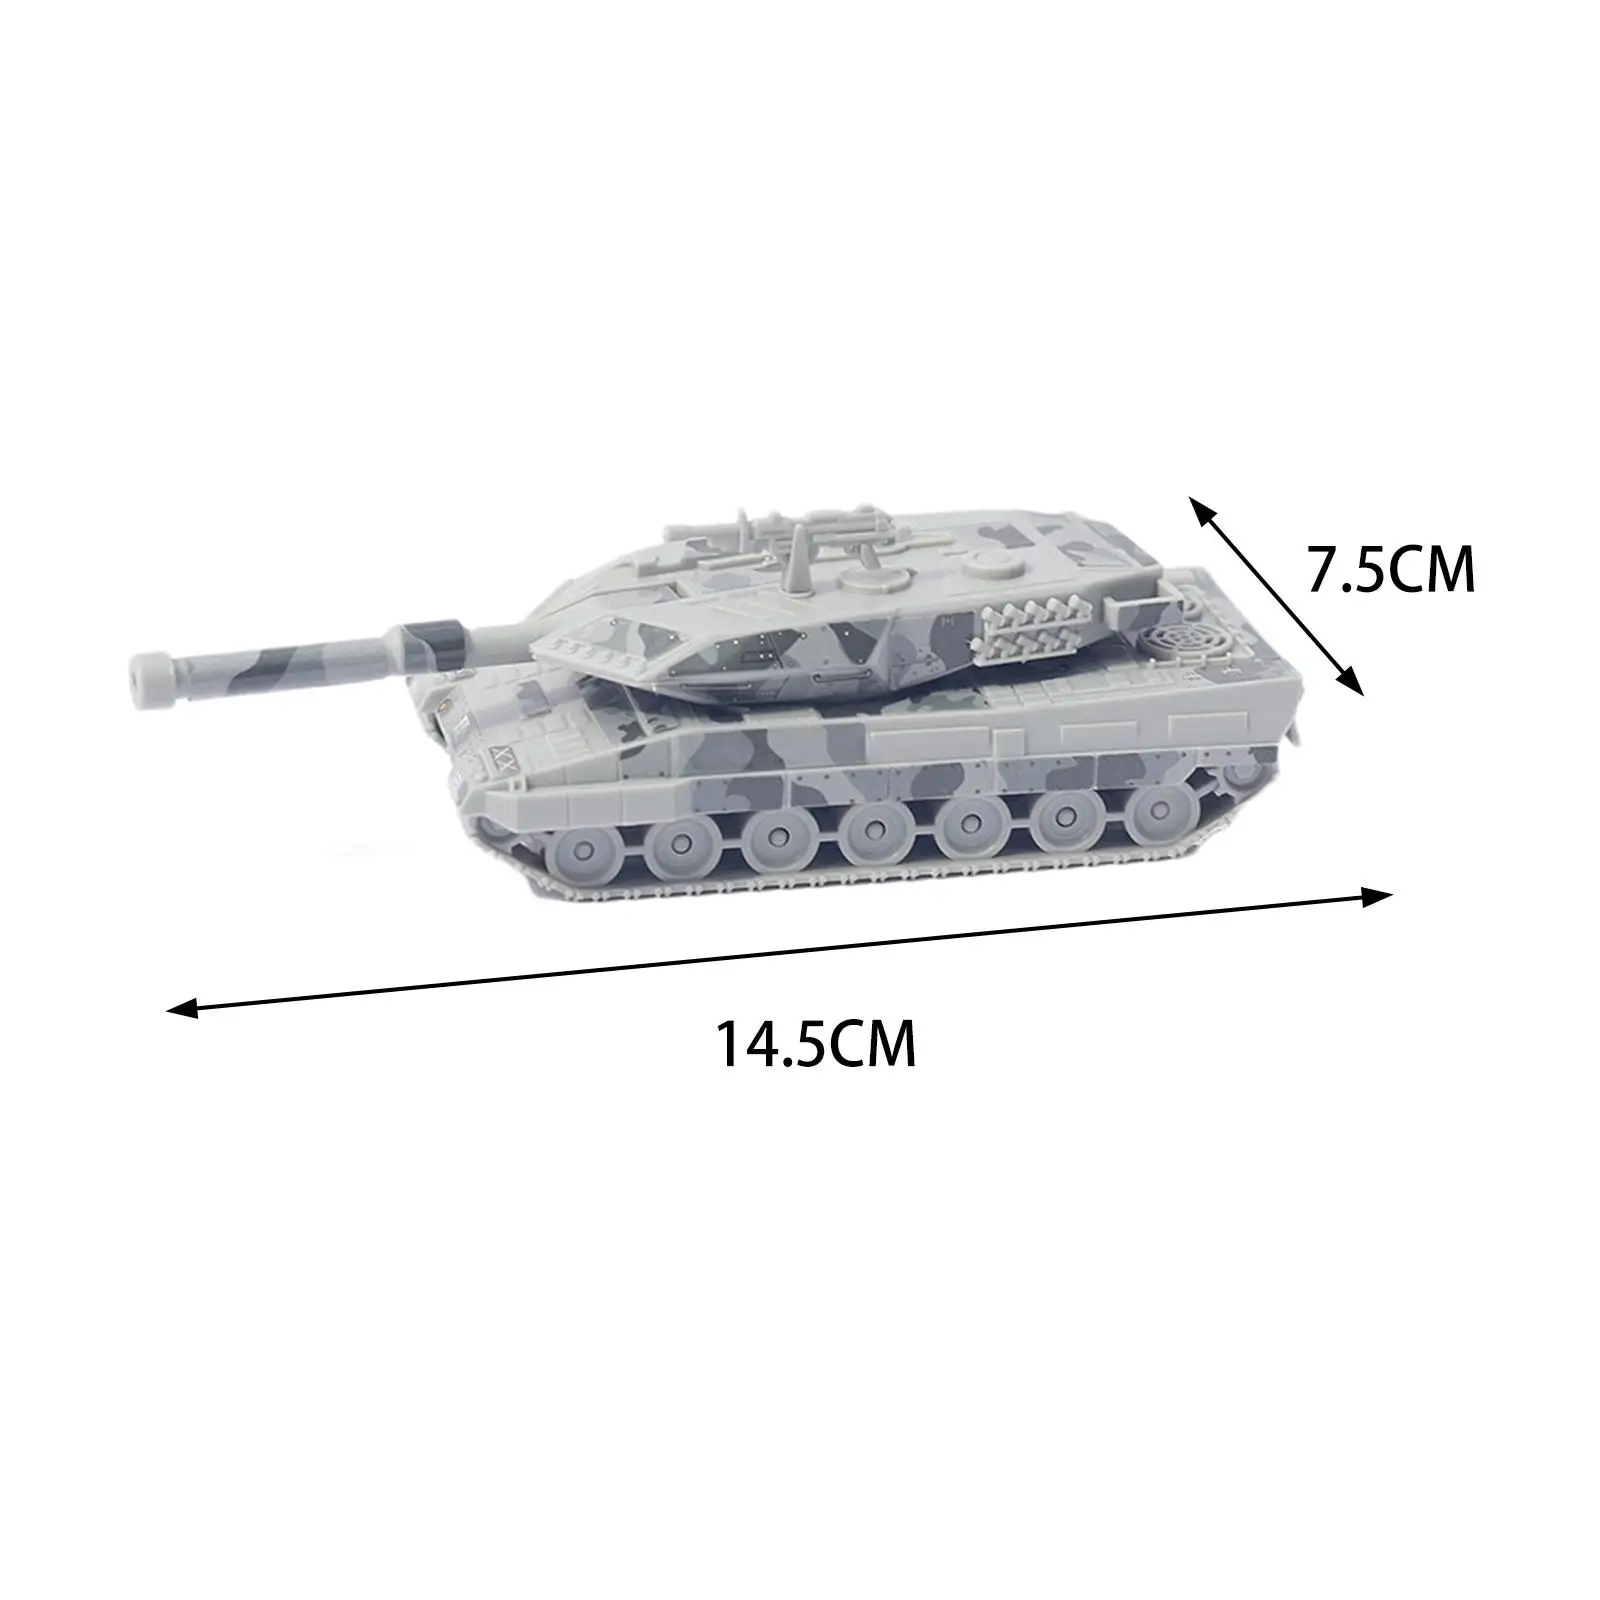 4 Pieces 1/100 Tank Model 99A1 2A6 Miniature Tank Model Ornament Education Toy Tabletop Decor for Kids Children Boy Girls Gifts